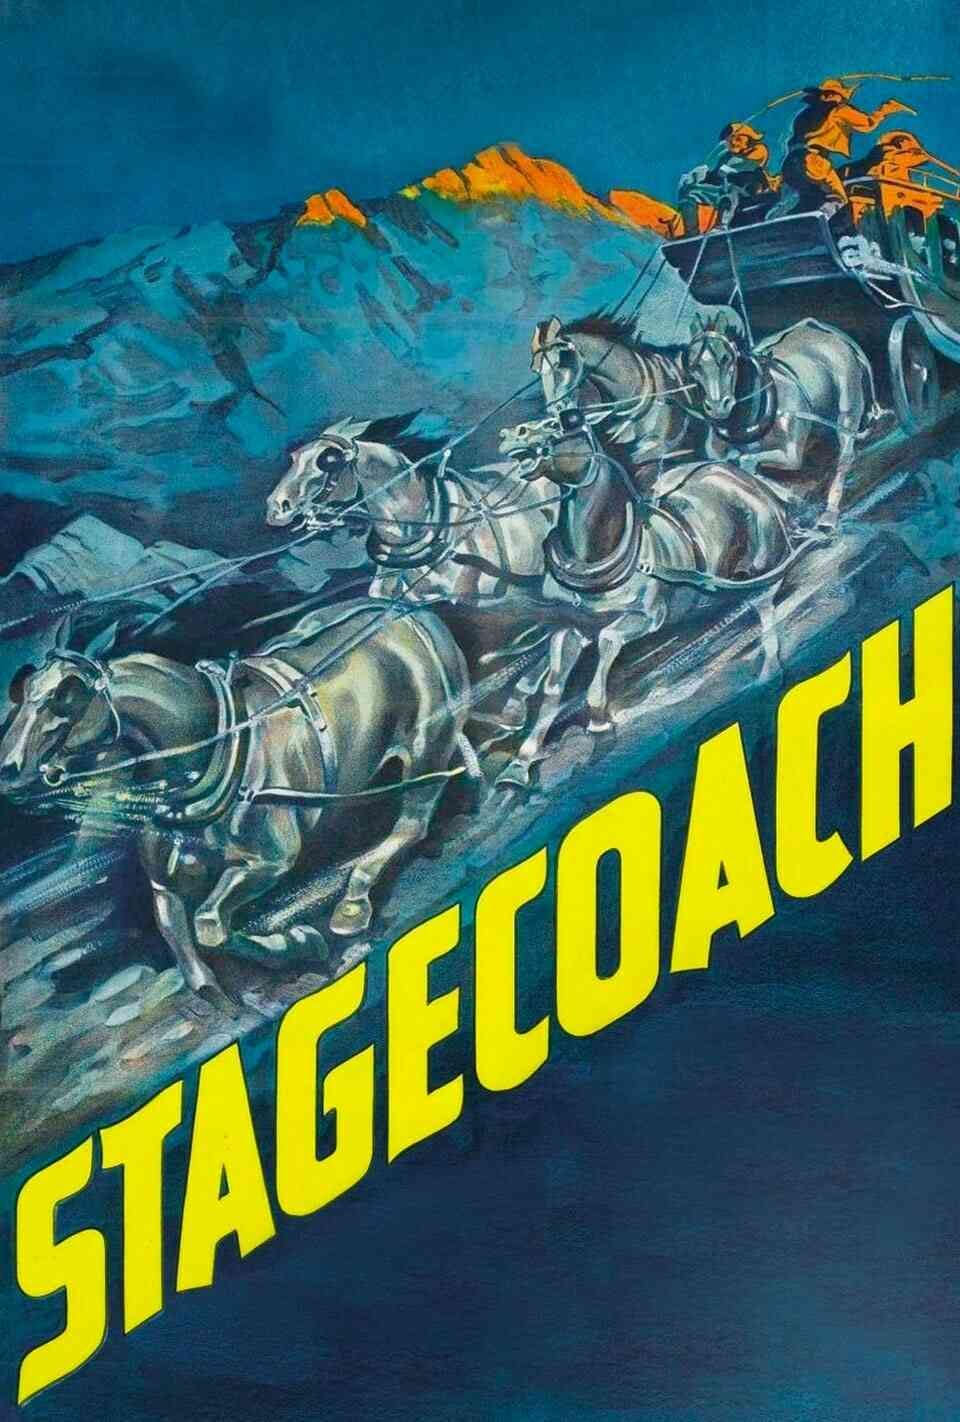 Read Stagecoach screenplay (poster)